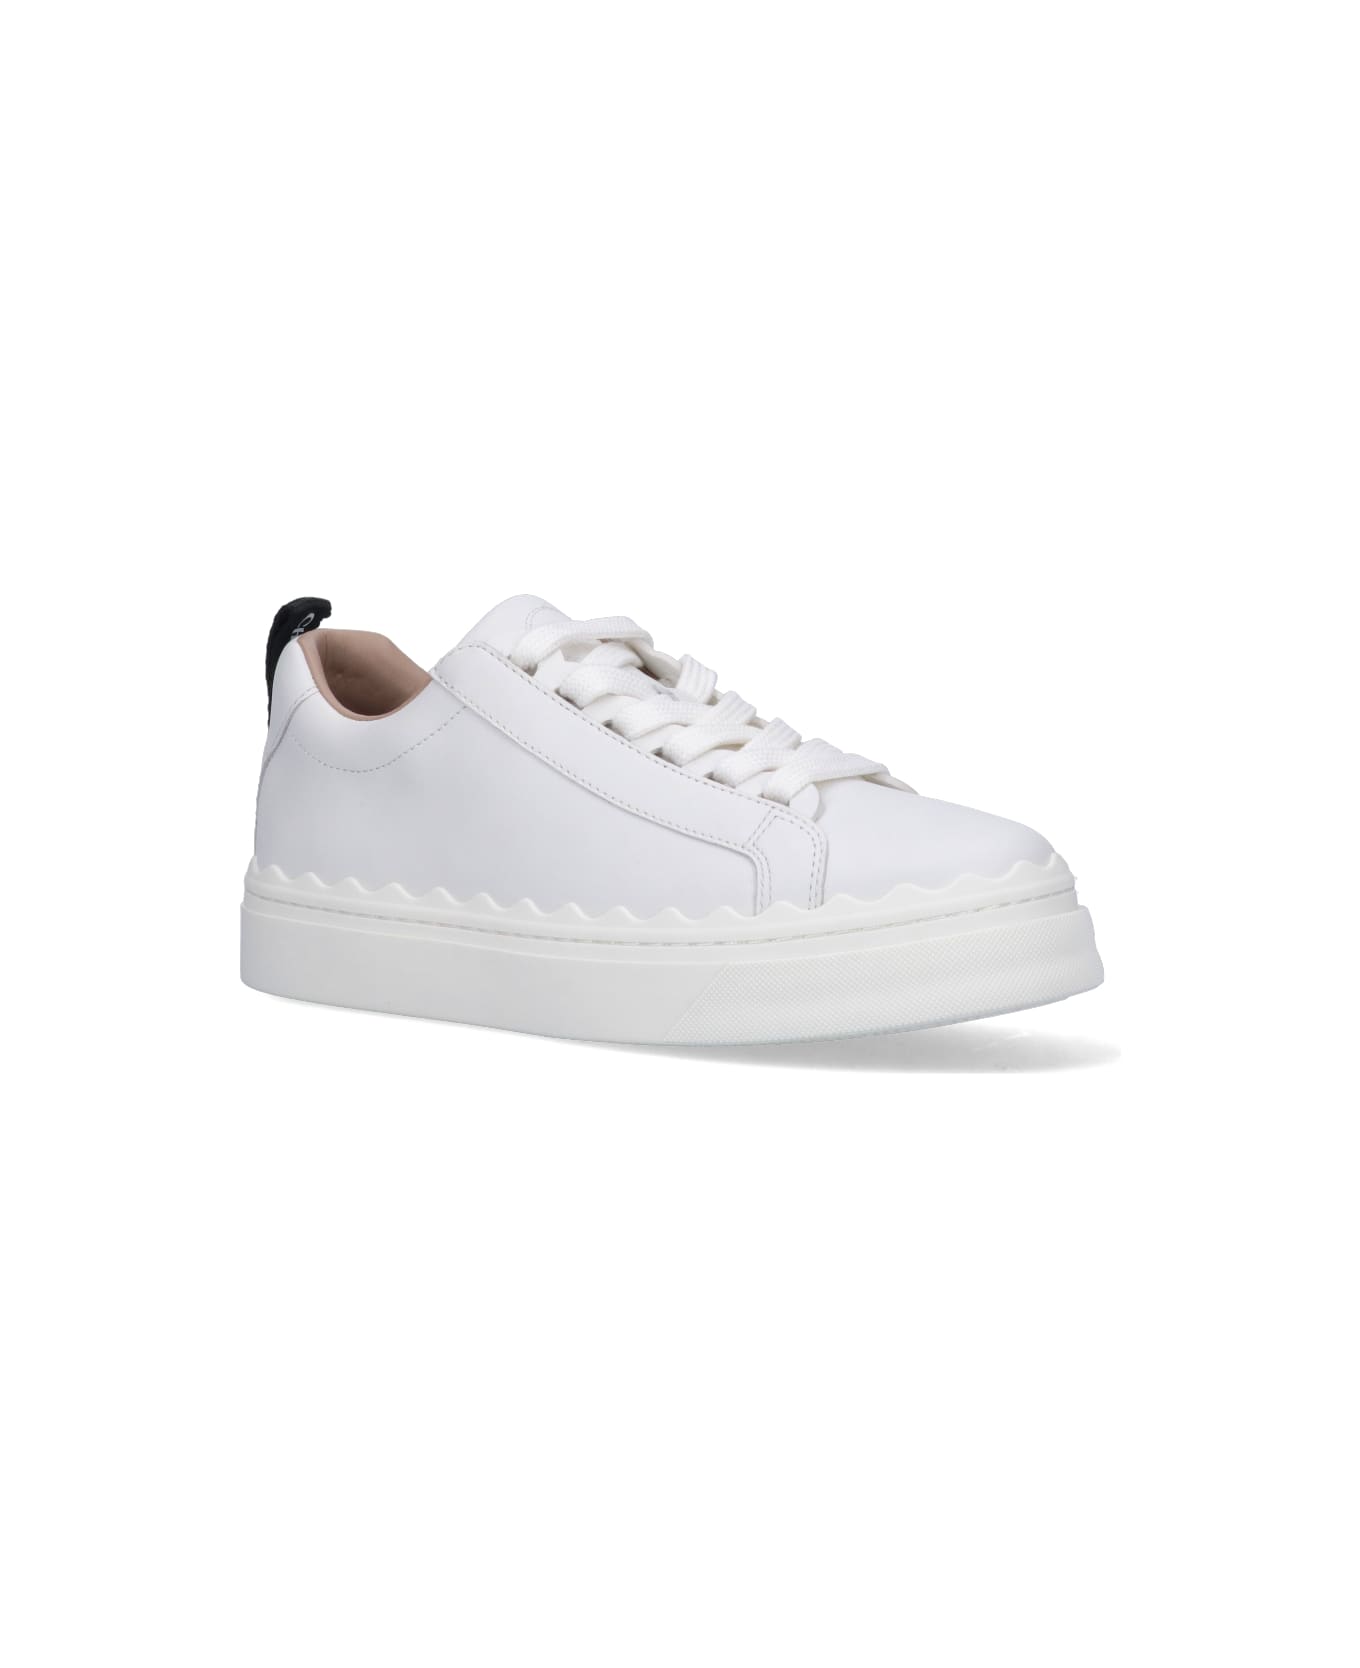 Chloé Lauren Sneakers In White Leather - Bianco スニーカー